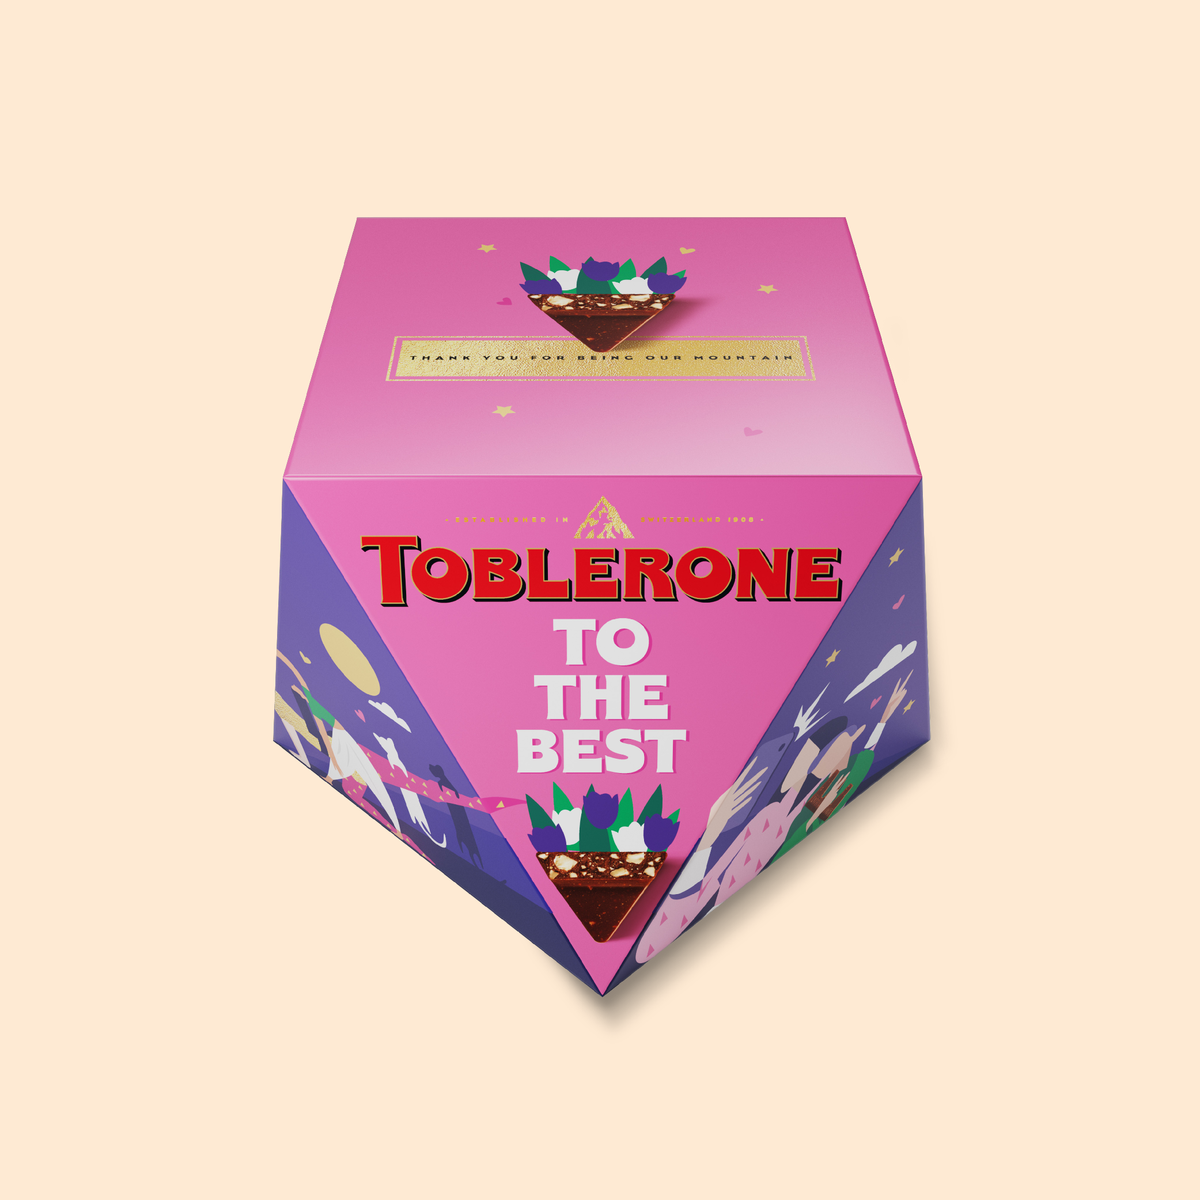 Personalised Toblerone Chocolate Box placed in front of an ivory background.